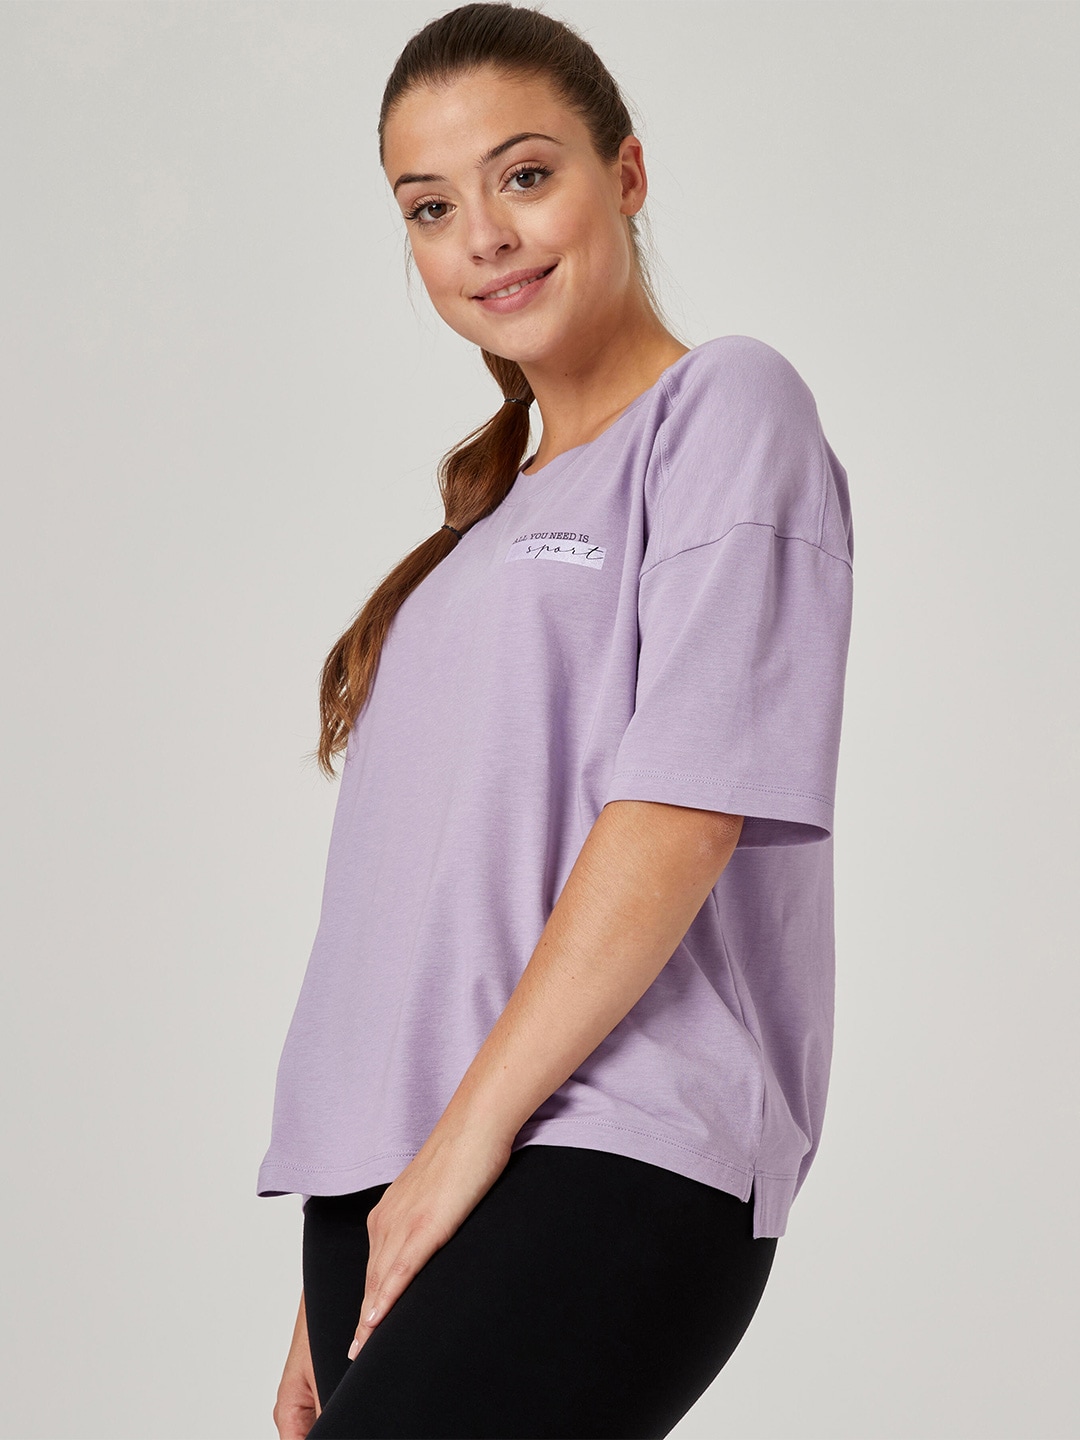 NYAMBA By Decathlon Women Purple Loose-Fit T-Shirt Price in India